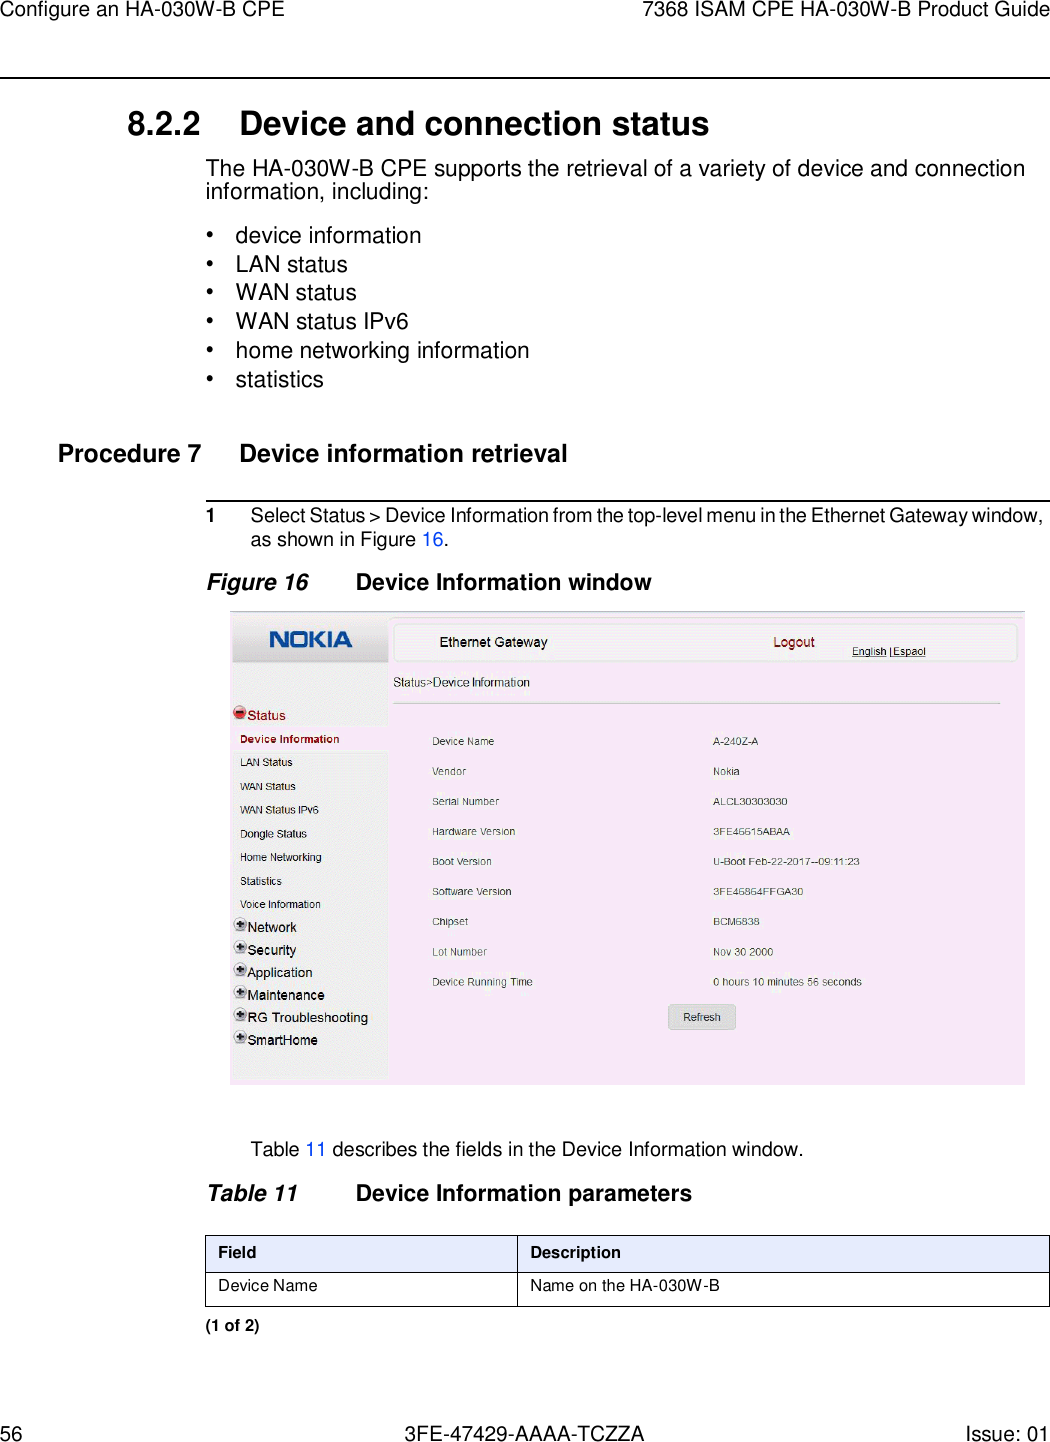 Page 56 of Nokia Bell HA030WB 7368 Intelligent Services Access Manager CPE User Manual 7368 ISAM CPE HA 020W A Product Guide